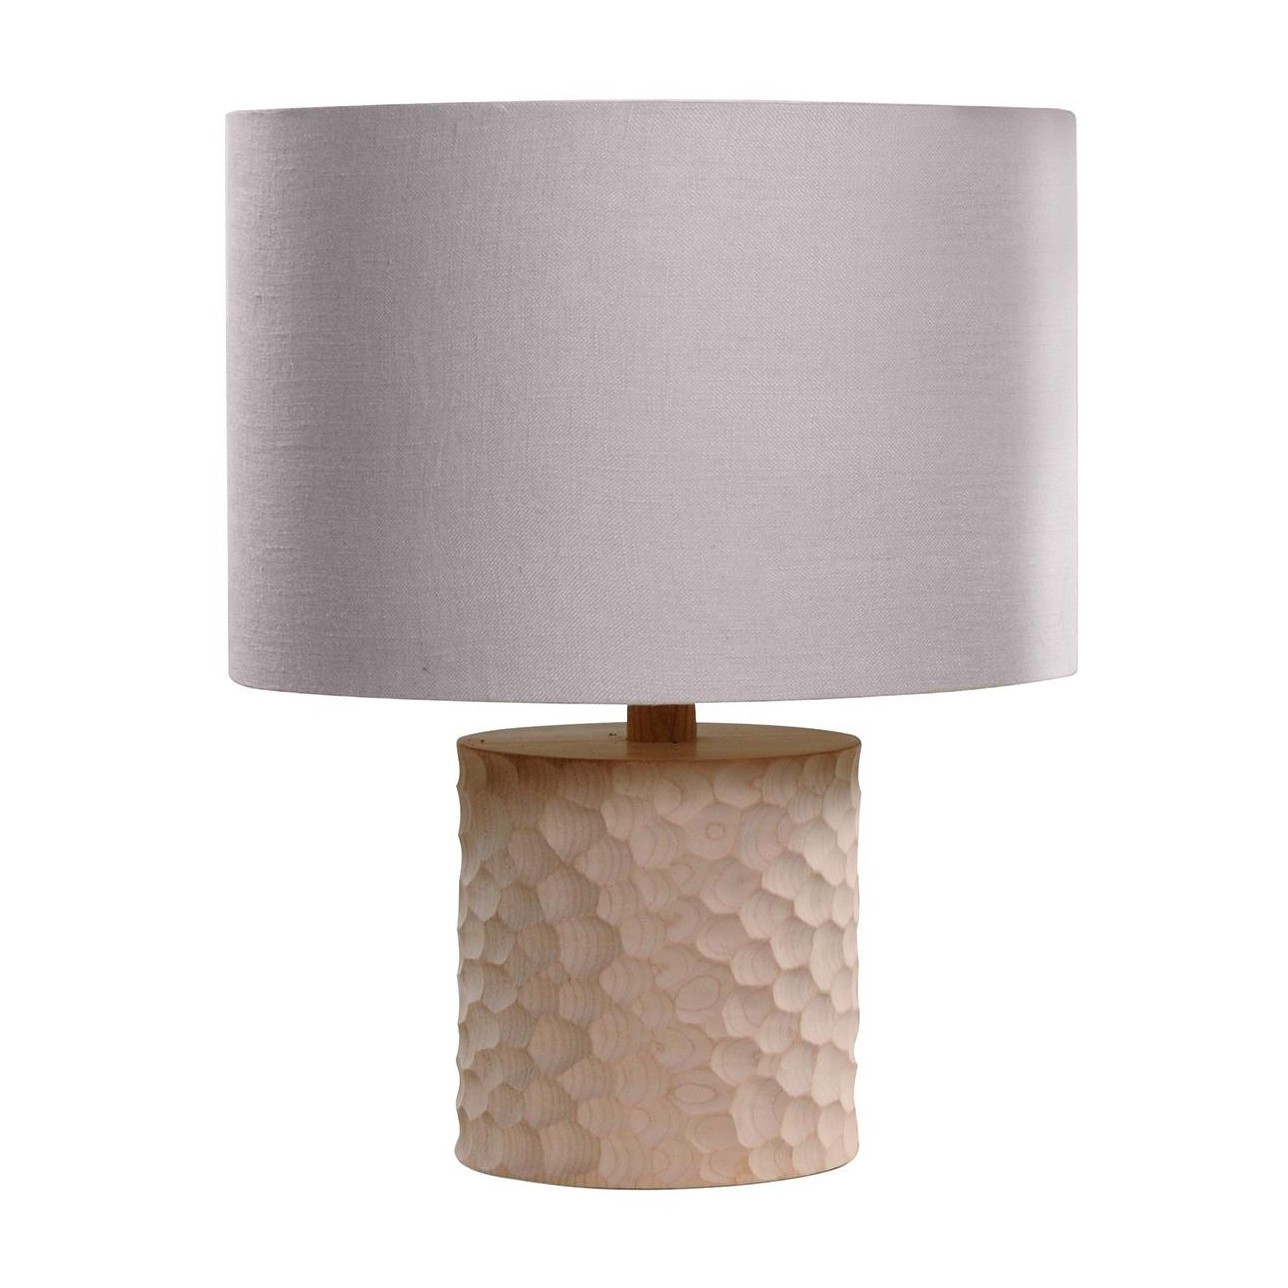 Fireplace Sconce Lighting Lovely touch Table Lamp